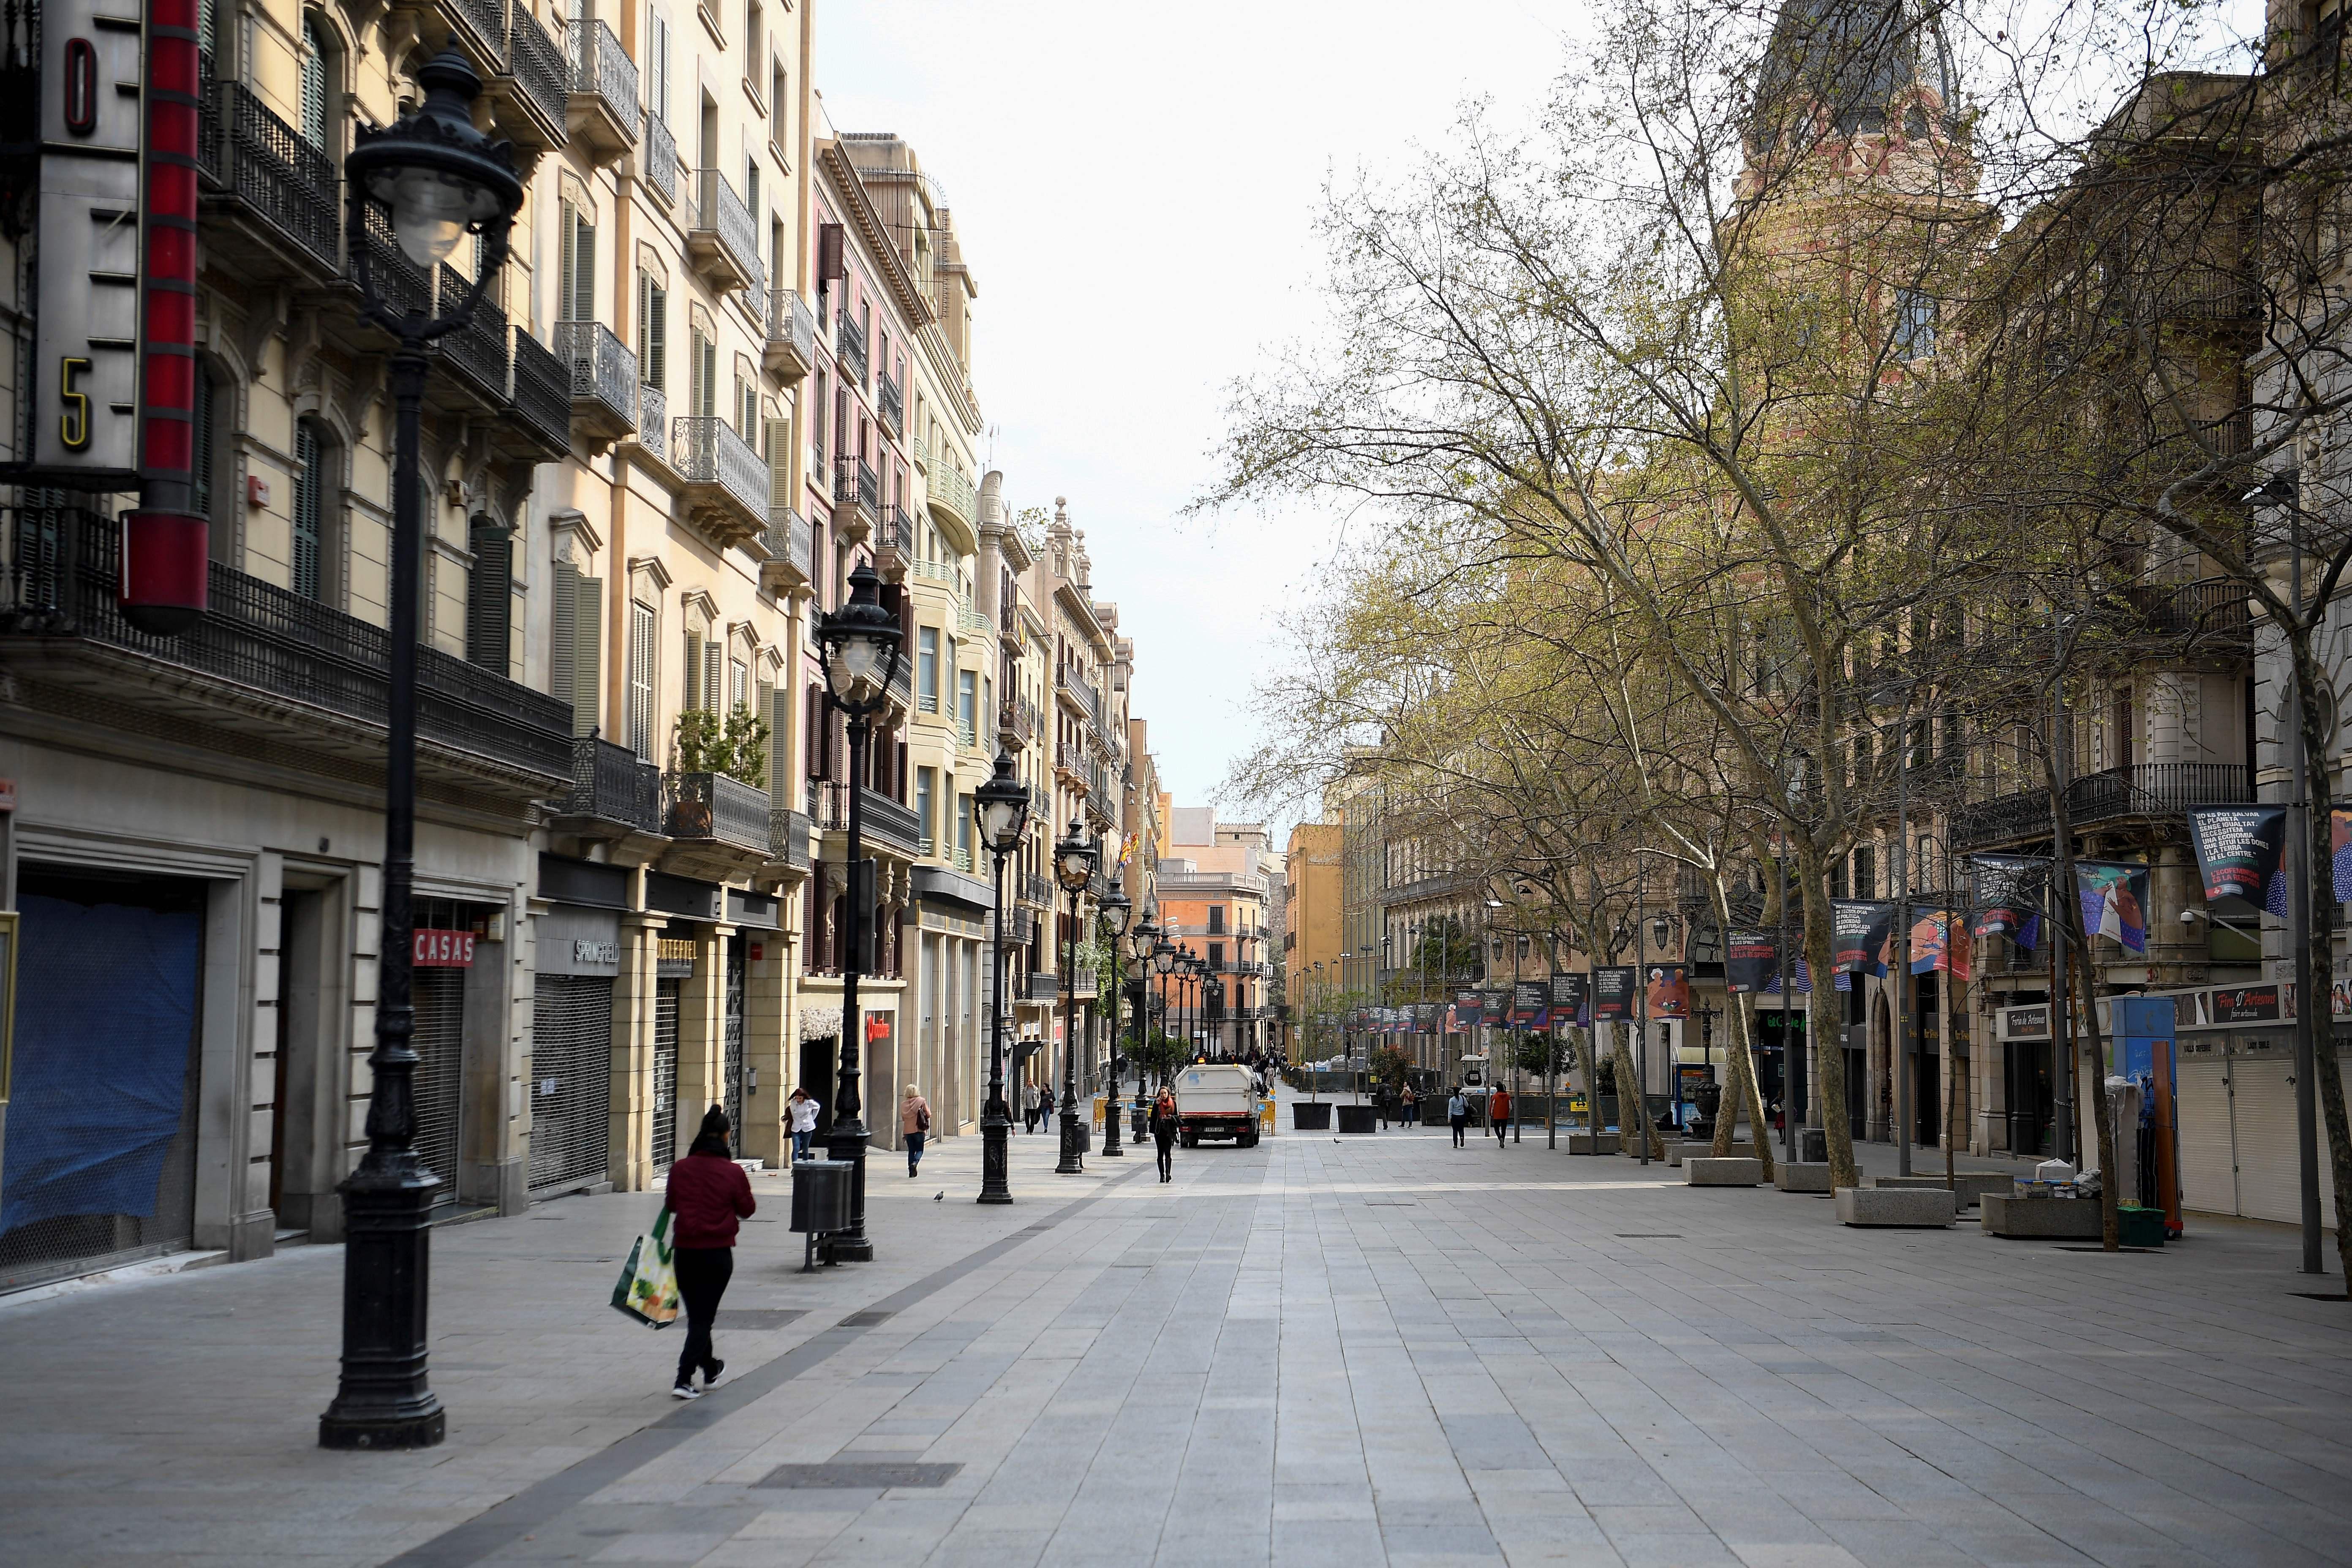 A Barcelona street, lined with shops, nearly empty. A lone woman walks away from the camera with a shopping bag.